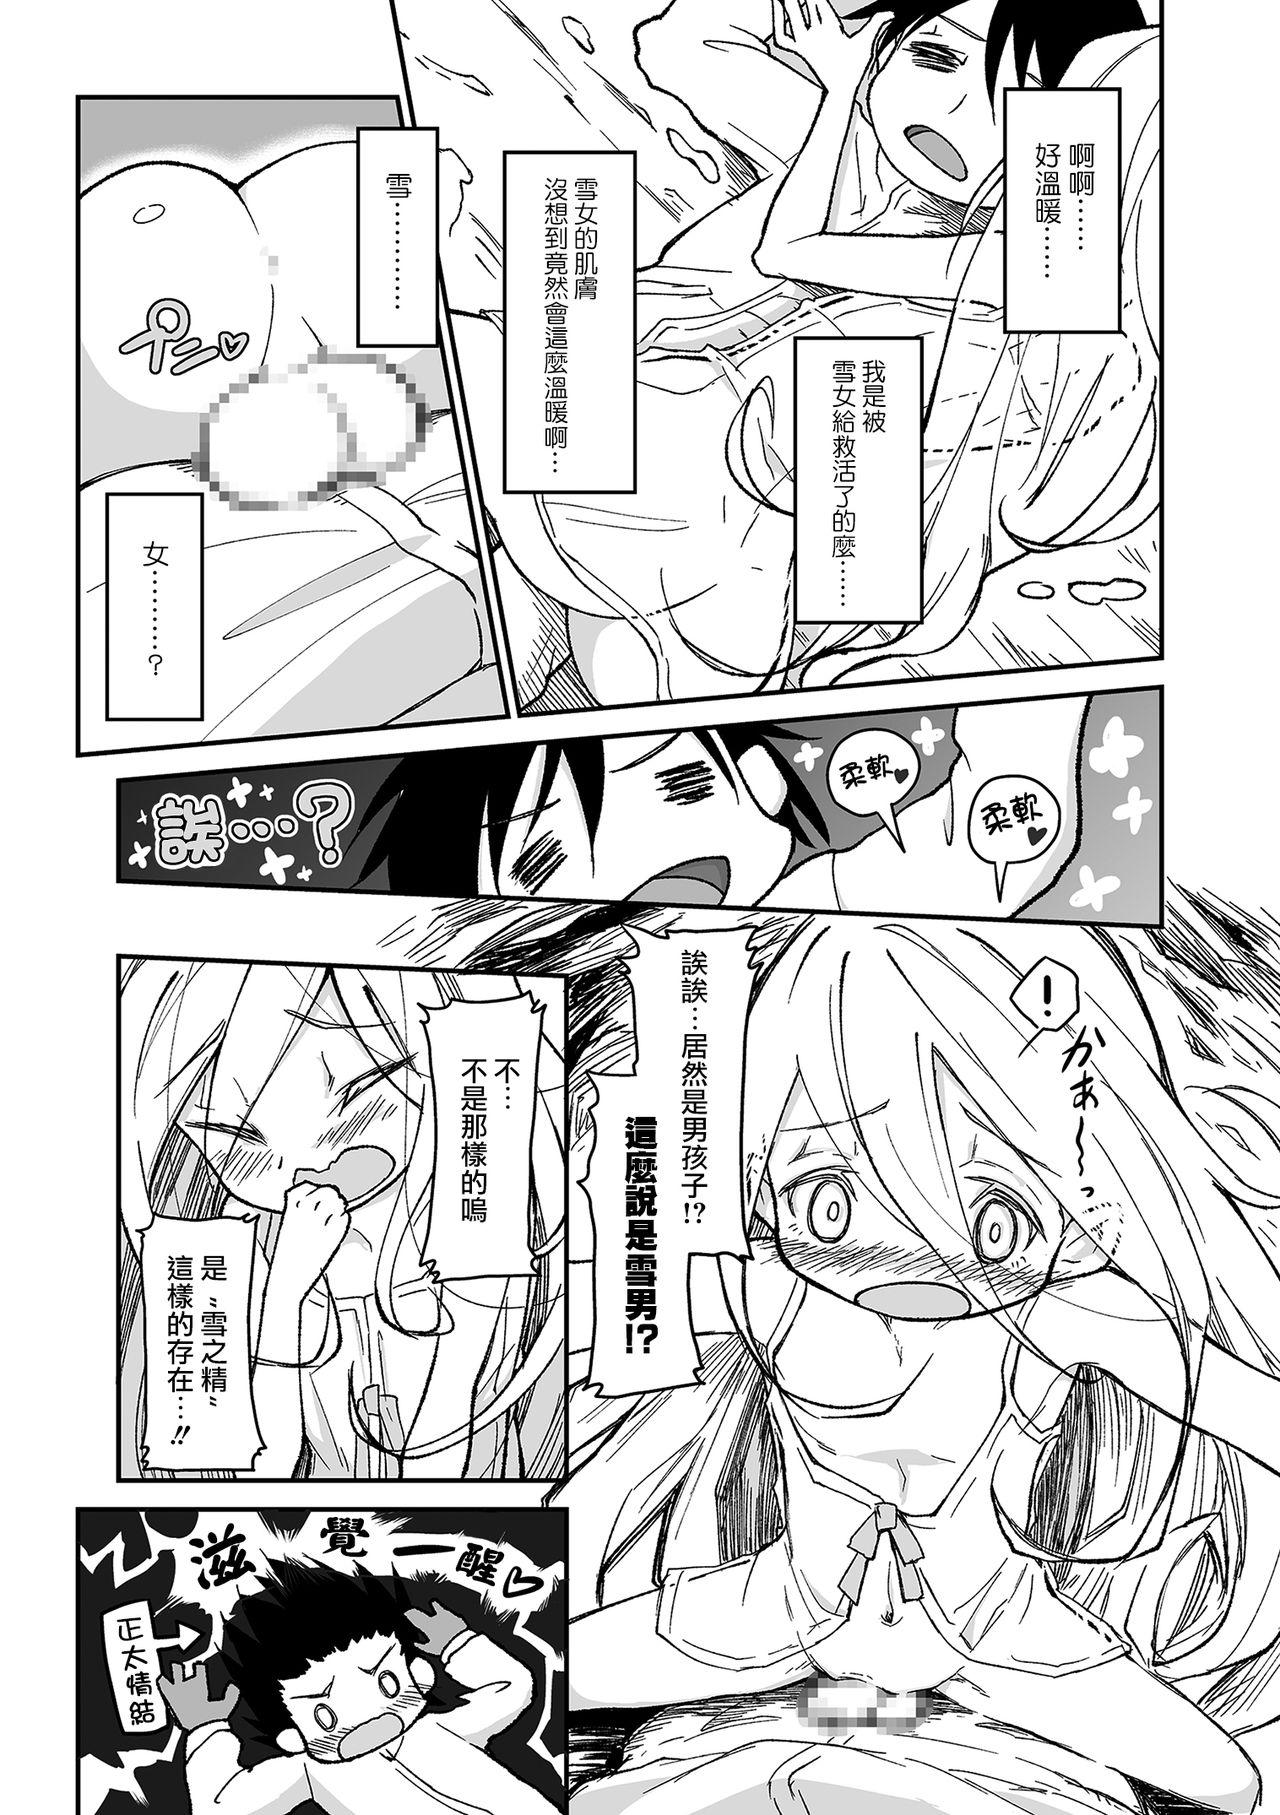 Peeing ユキのせい？ Hot Mom - Page 5